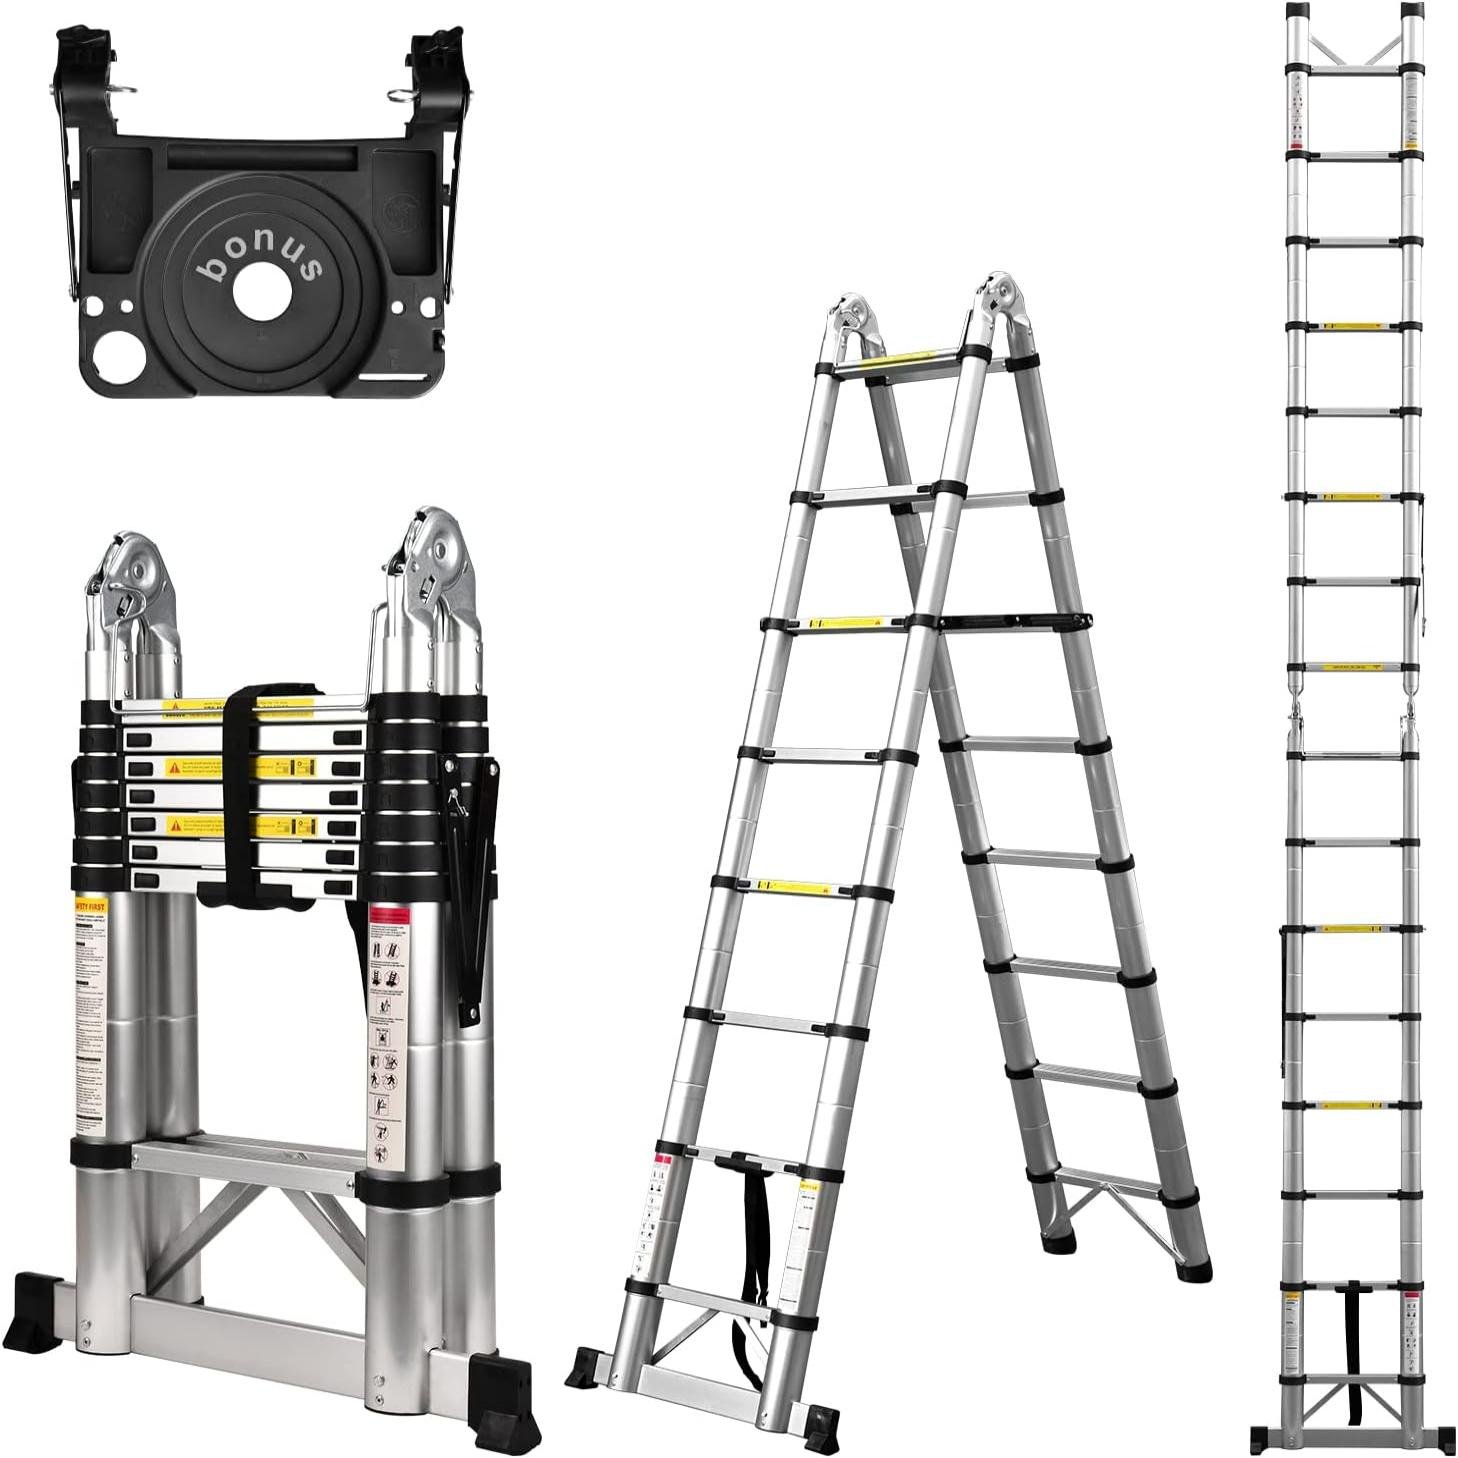 Telescoping Ladder A Frame 16.5 Ft Compact Aluminum Extension Ladder 330 lb Capacity